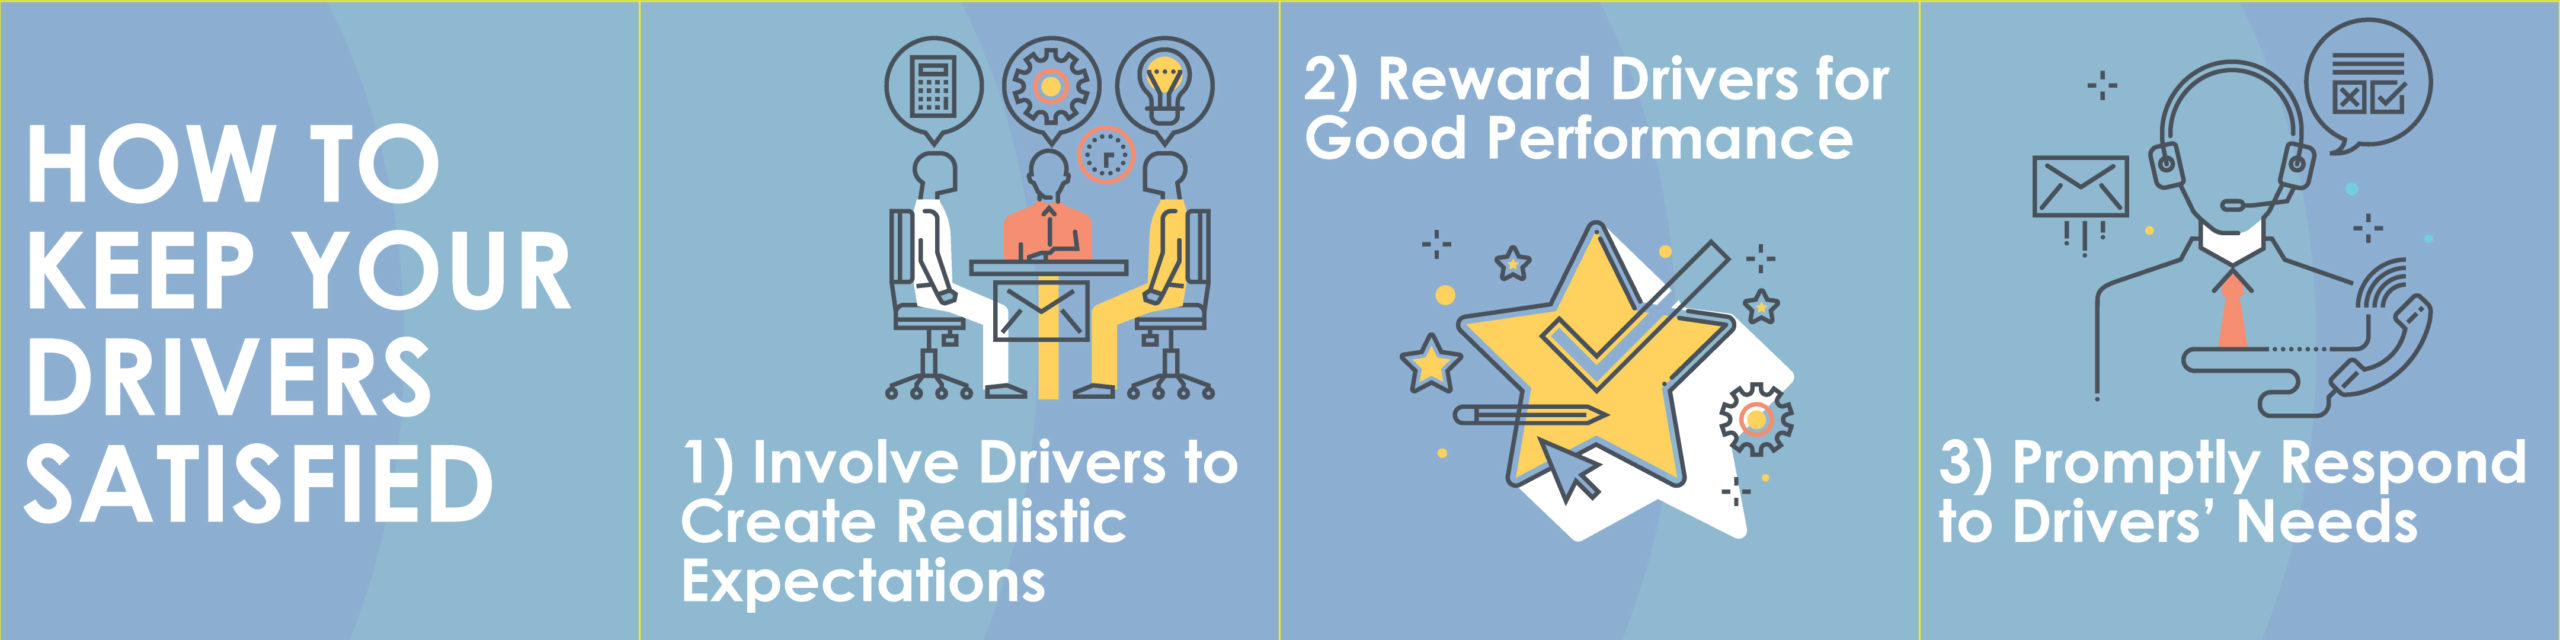 A wide infographic that shares three ways to keep fleet drivers satisfied. The first tip is "Involve Drivers to Create Realistic Expectations". The second tip is "Reward Drivers for Good Performance". The third tip is "Promptly Respond to Drivers' Needs".